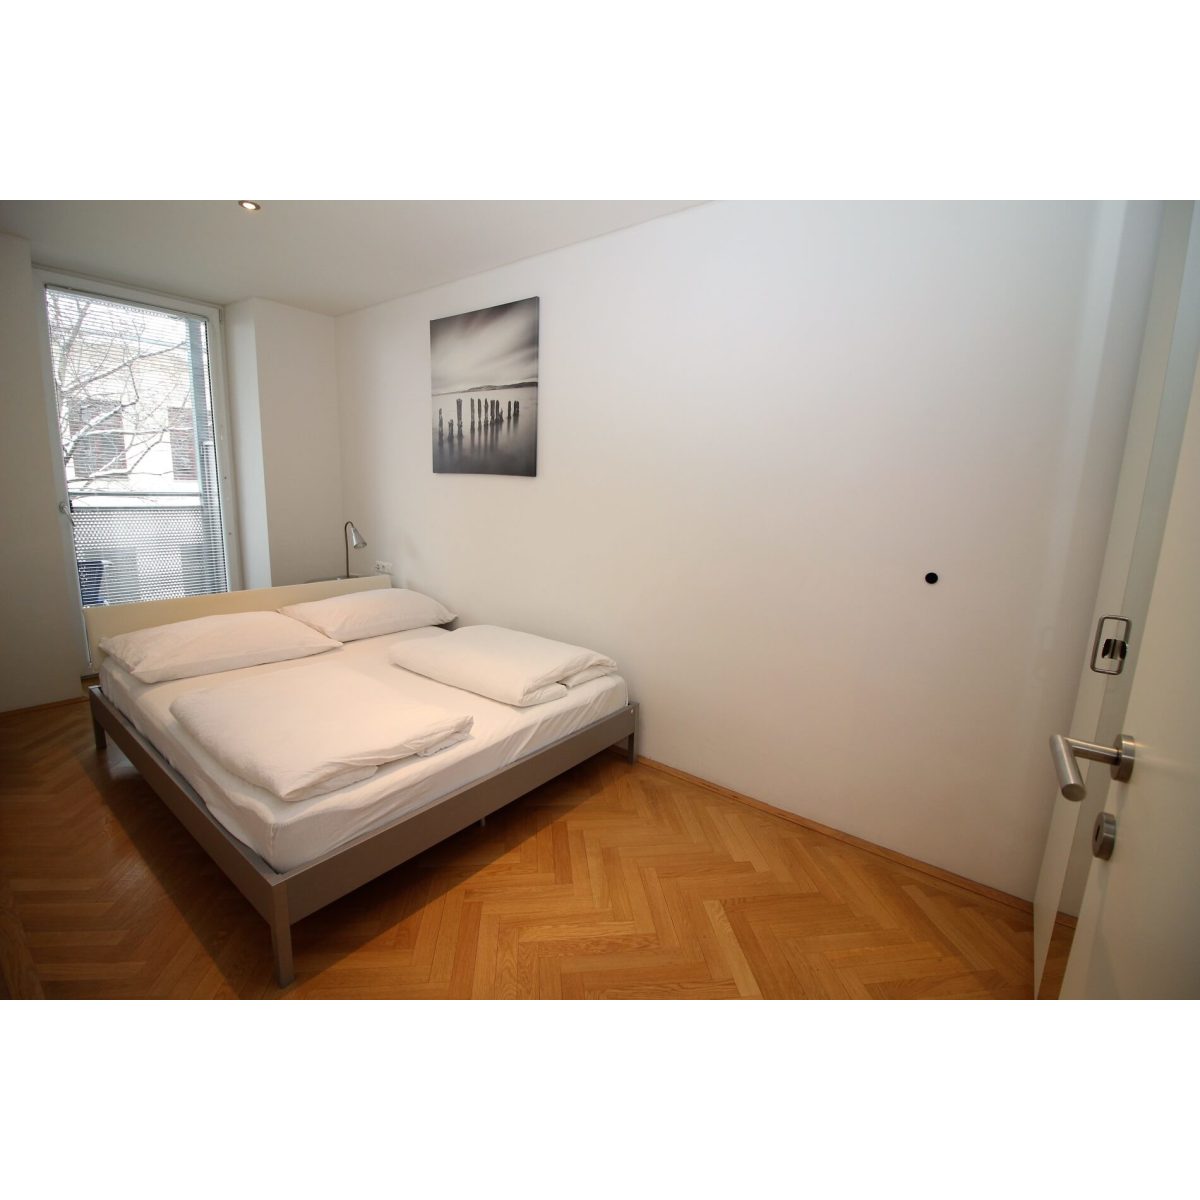 Completely furnished 2-bedroom apartment with Balcony in Vienna (great location) 17